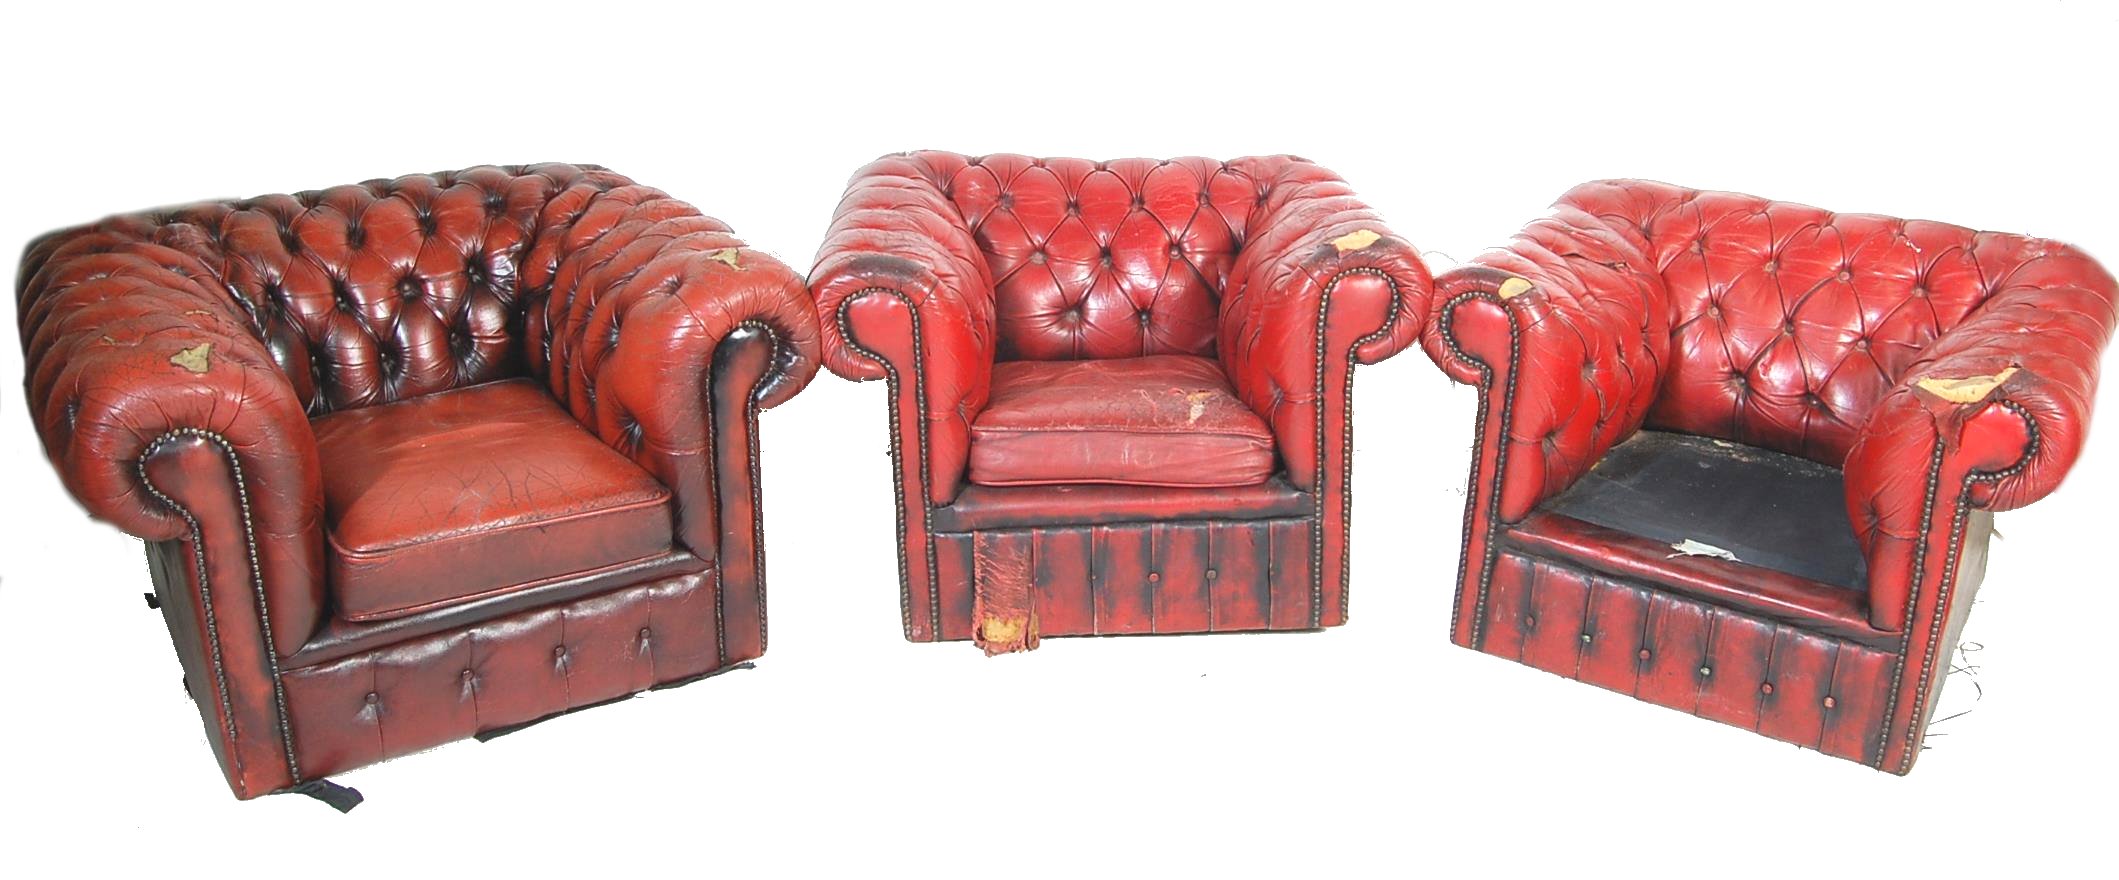 GROUP OF OXBLOOD LEATHER CHESTERFIELD ARMCHAIRS